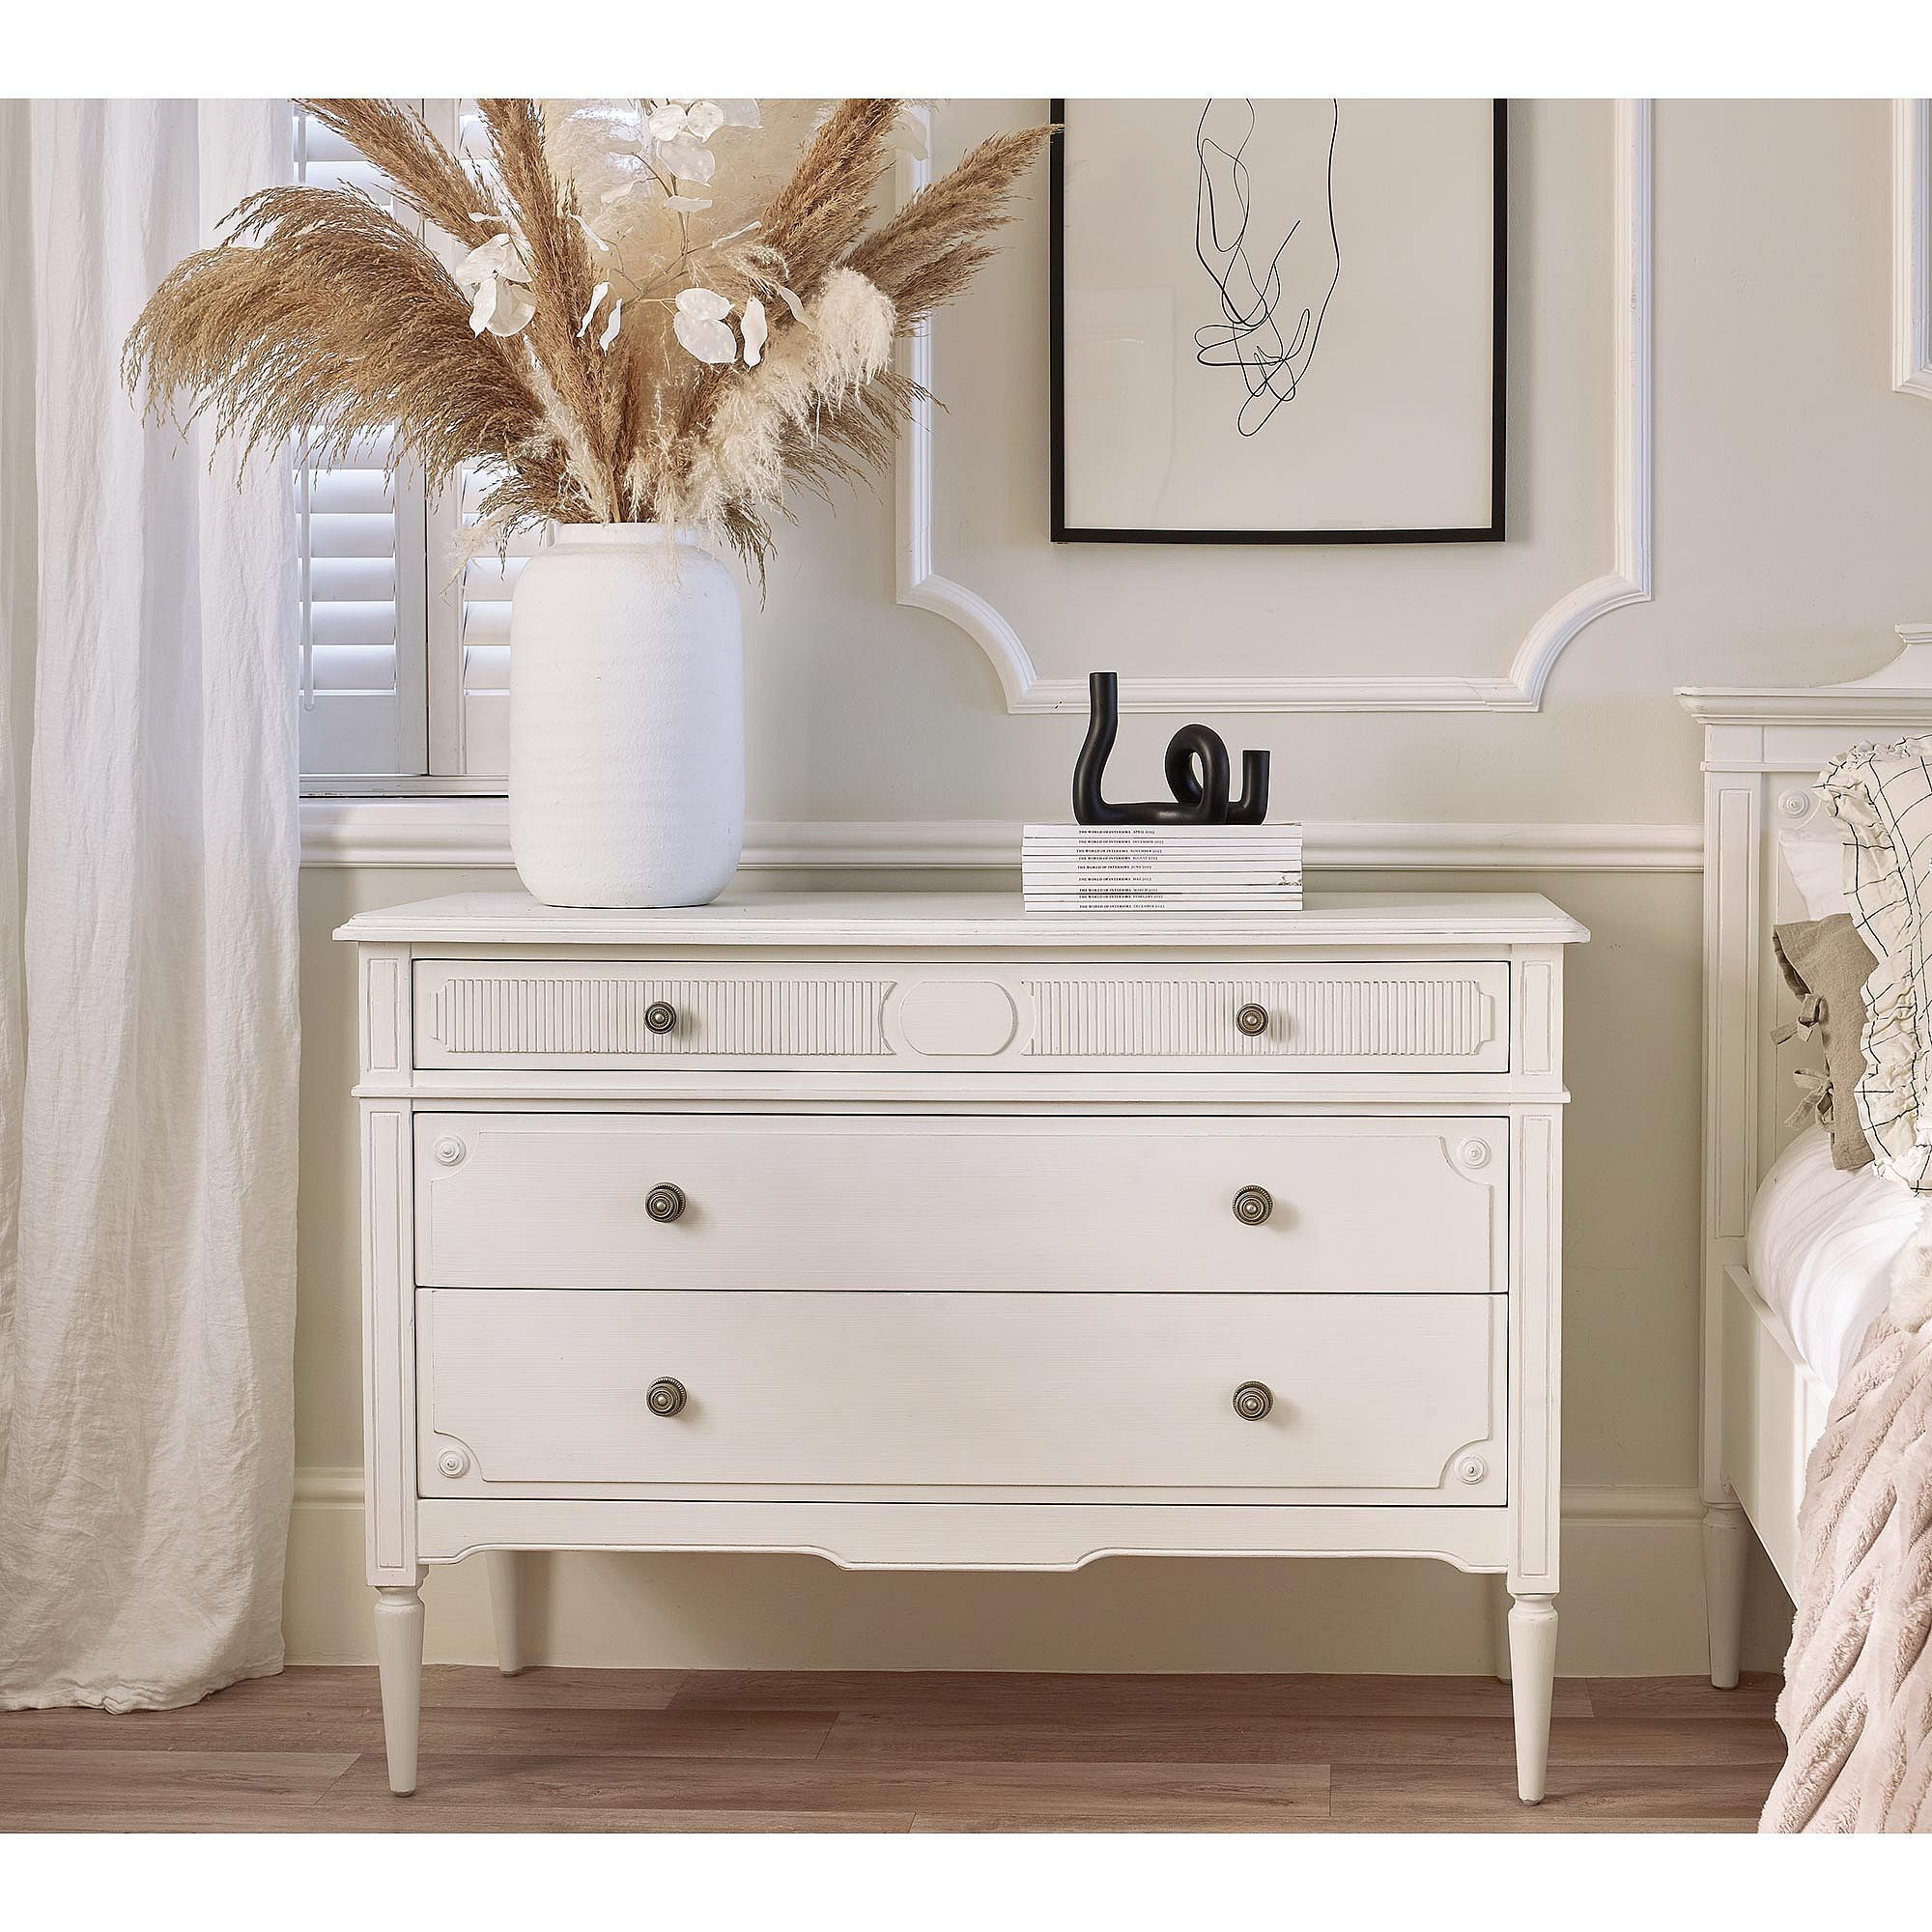 Avenue Blanc Chest of Drawers - image 1